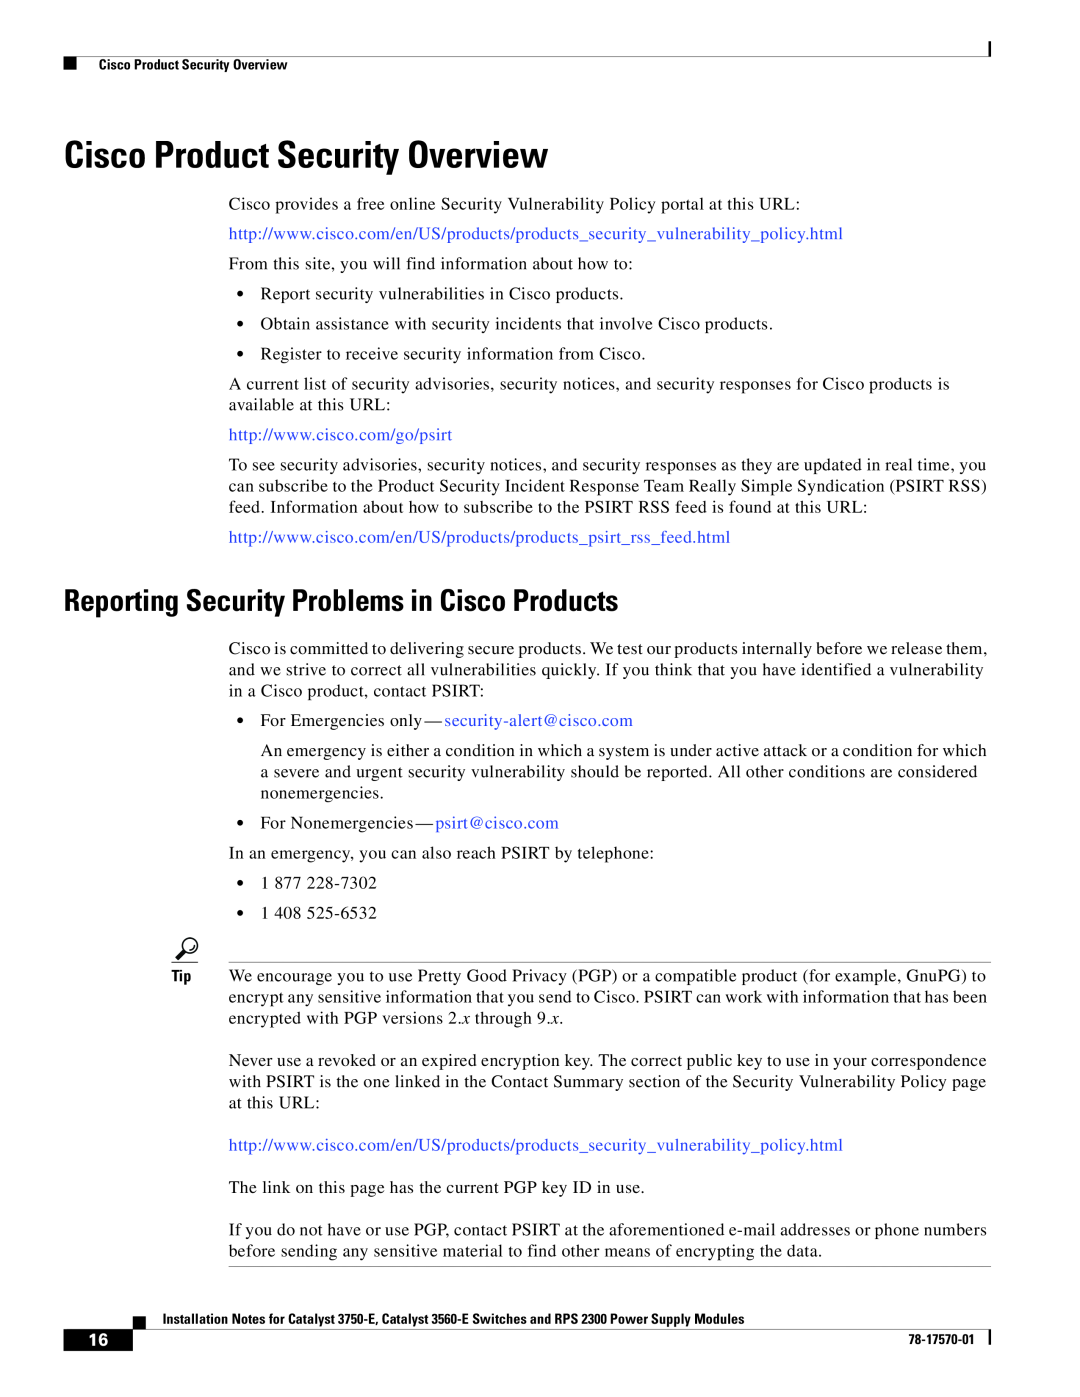 Cisco Systems 3560-E, RPS 2300, 3750-E Cisco Product Security Overview, Reporting Security Problems in Cisco Products 